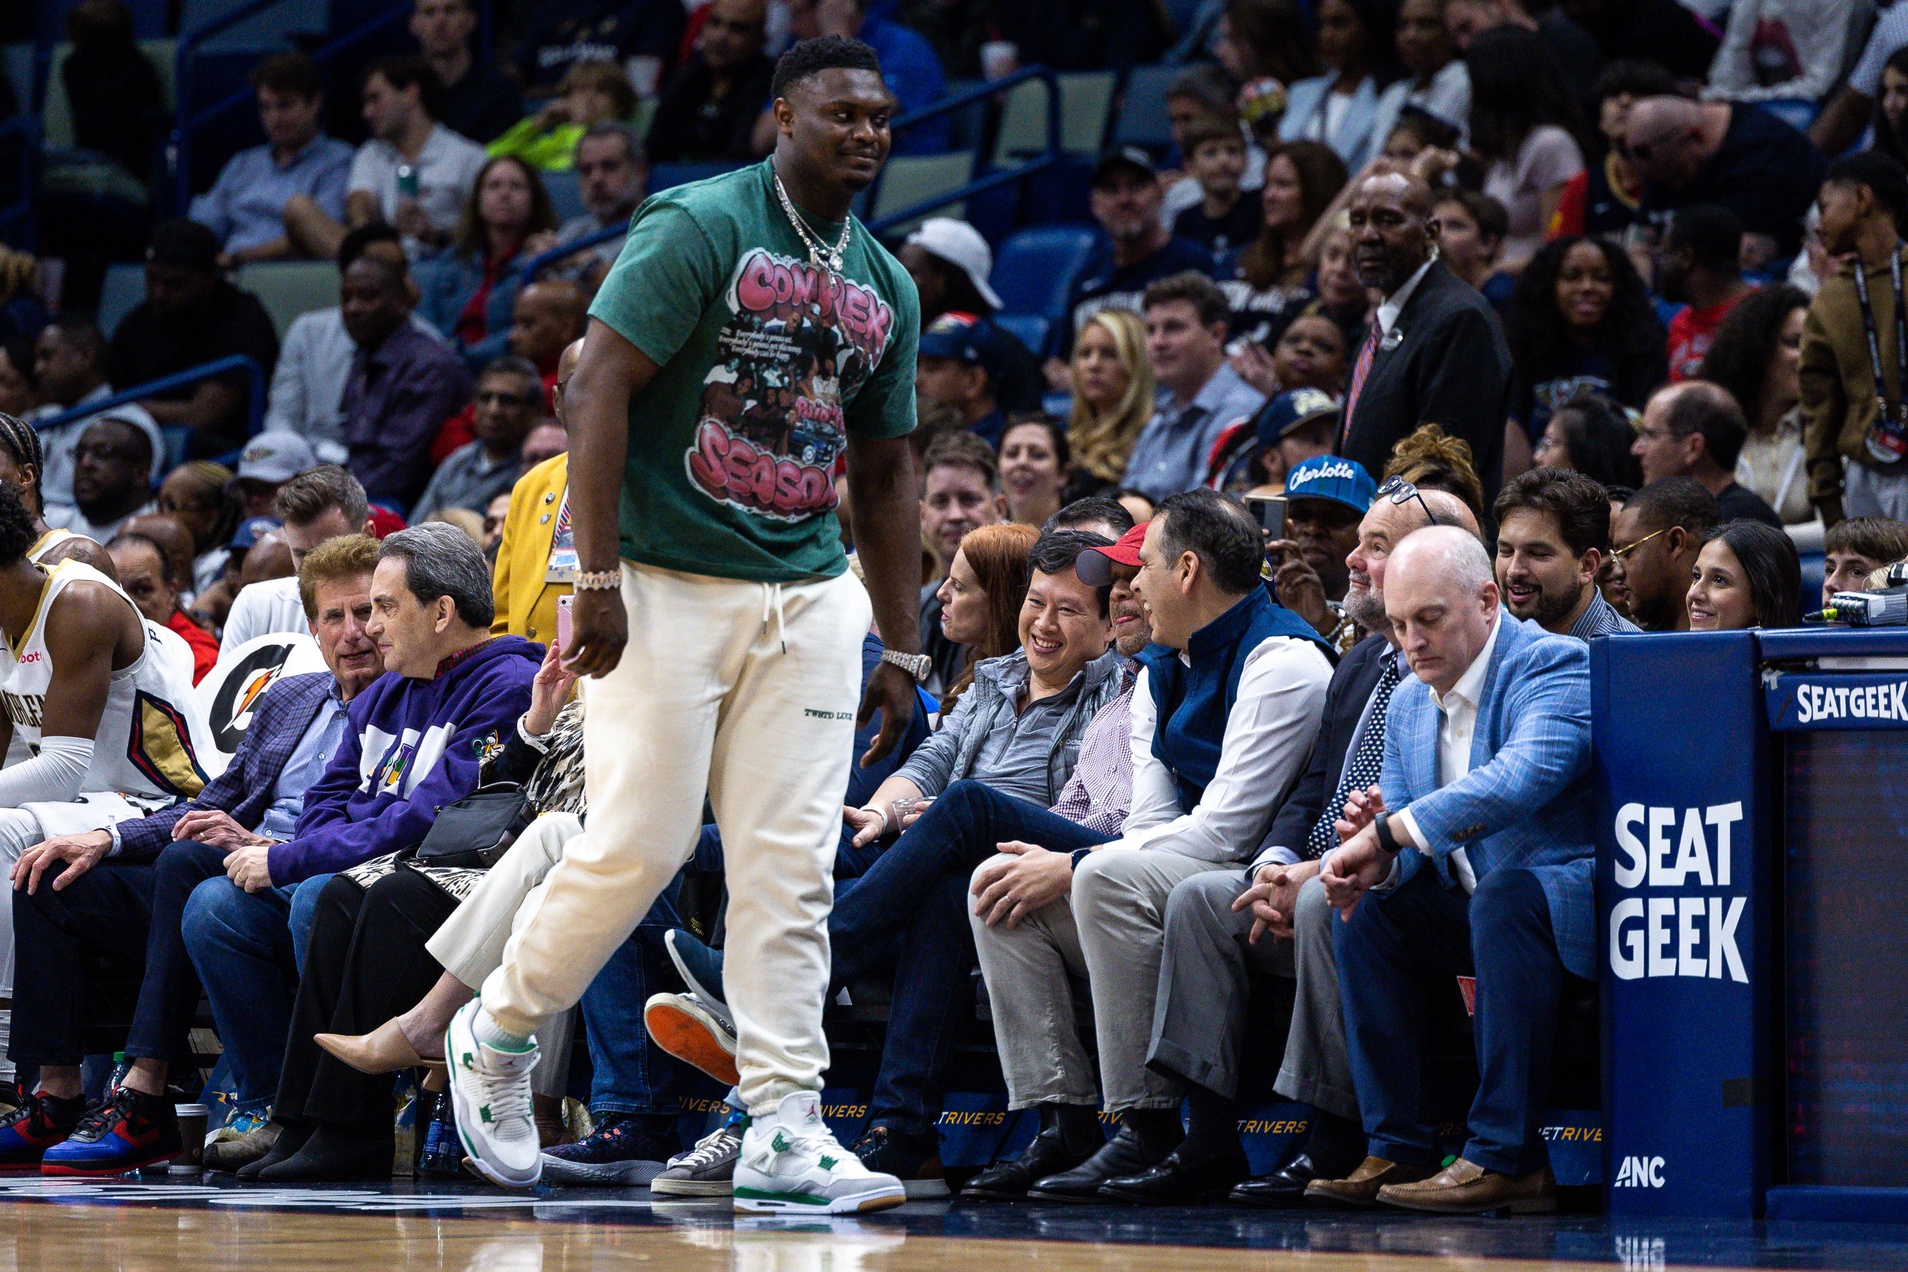 New Orleans Pelicans: Mar 23, 2023; New Orleans, Louisiana, USA; New Orleans Pelicans forward Zion Williamson (1) talks to fans on a time out against the Charlotte Hornets during the second half at Smoothie King Center. Mandatory Credit: Stephen Lew-USA TODAY Sports